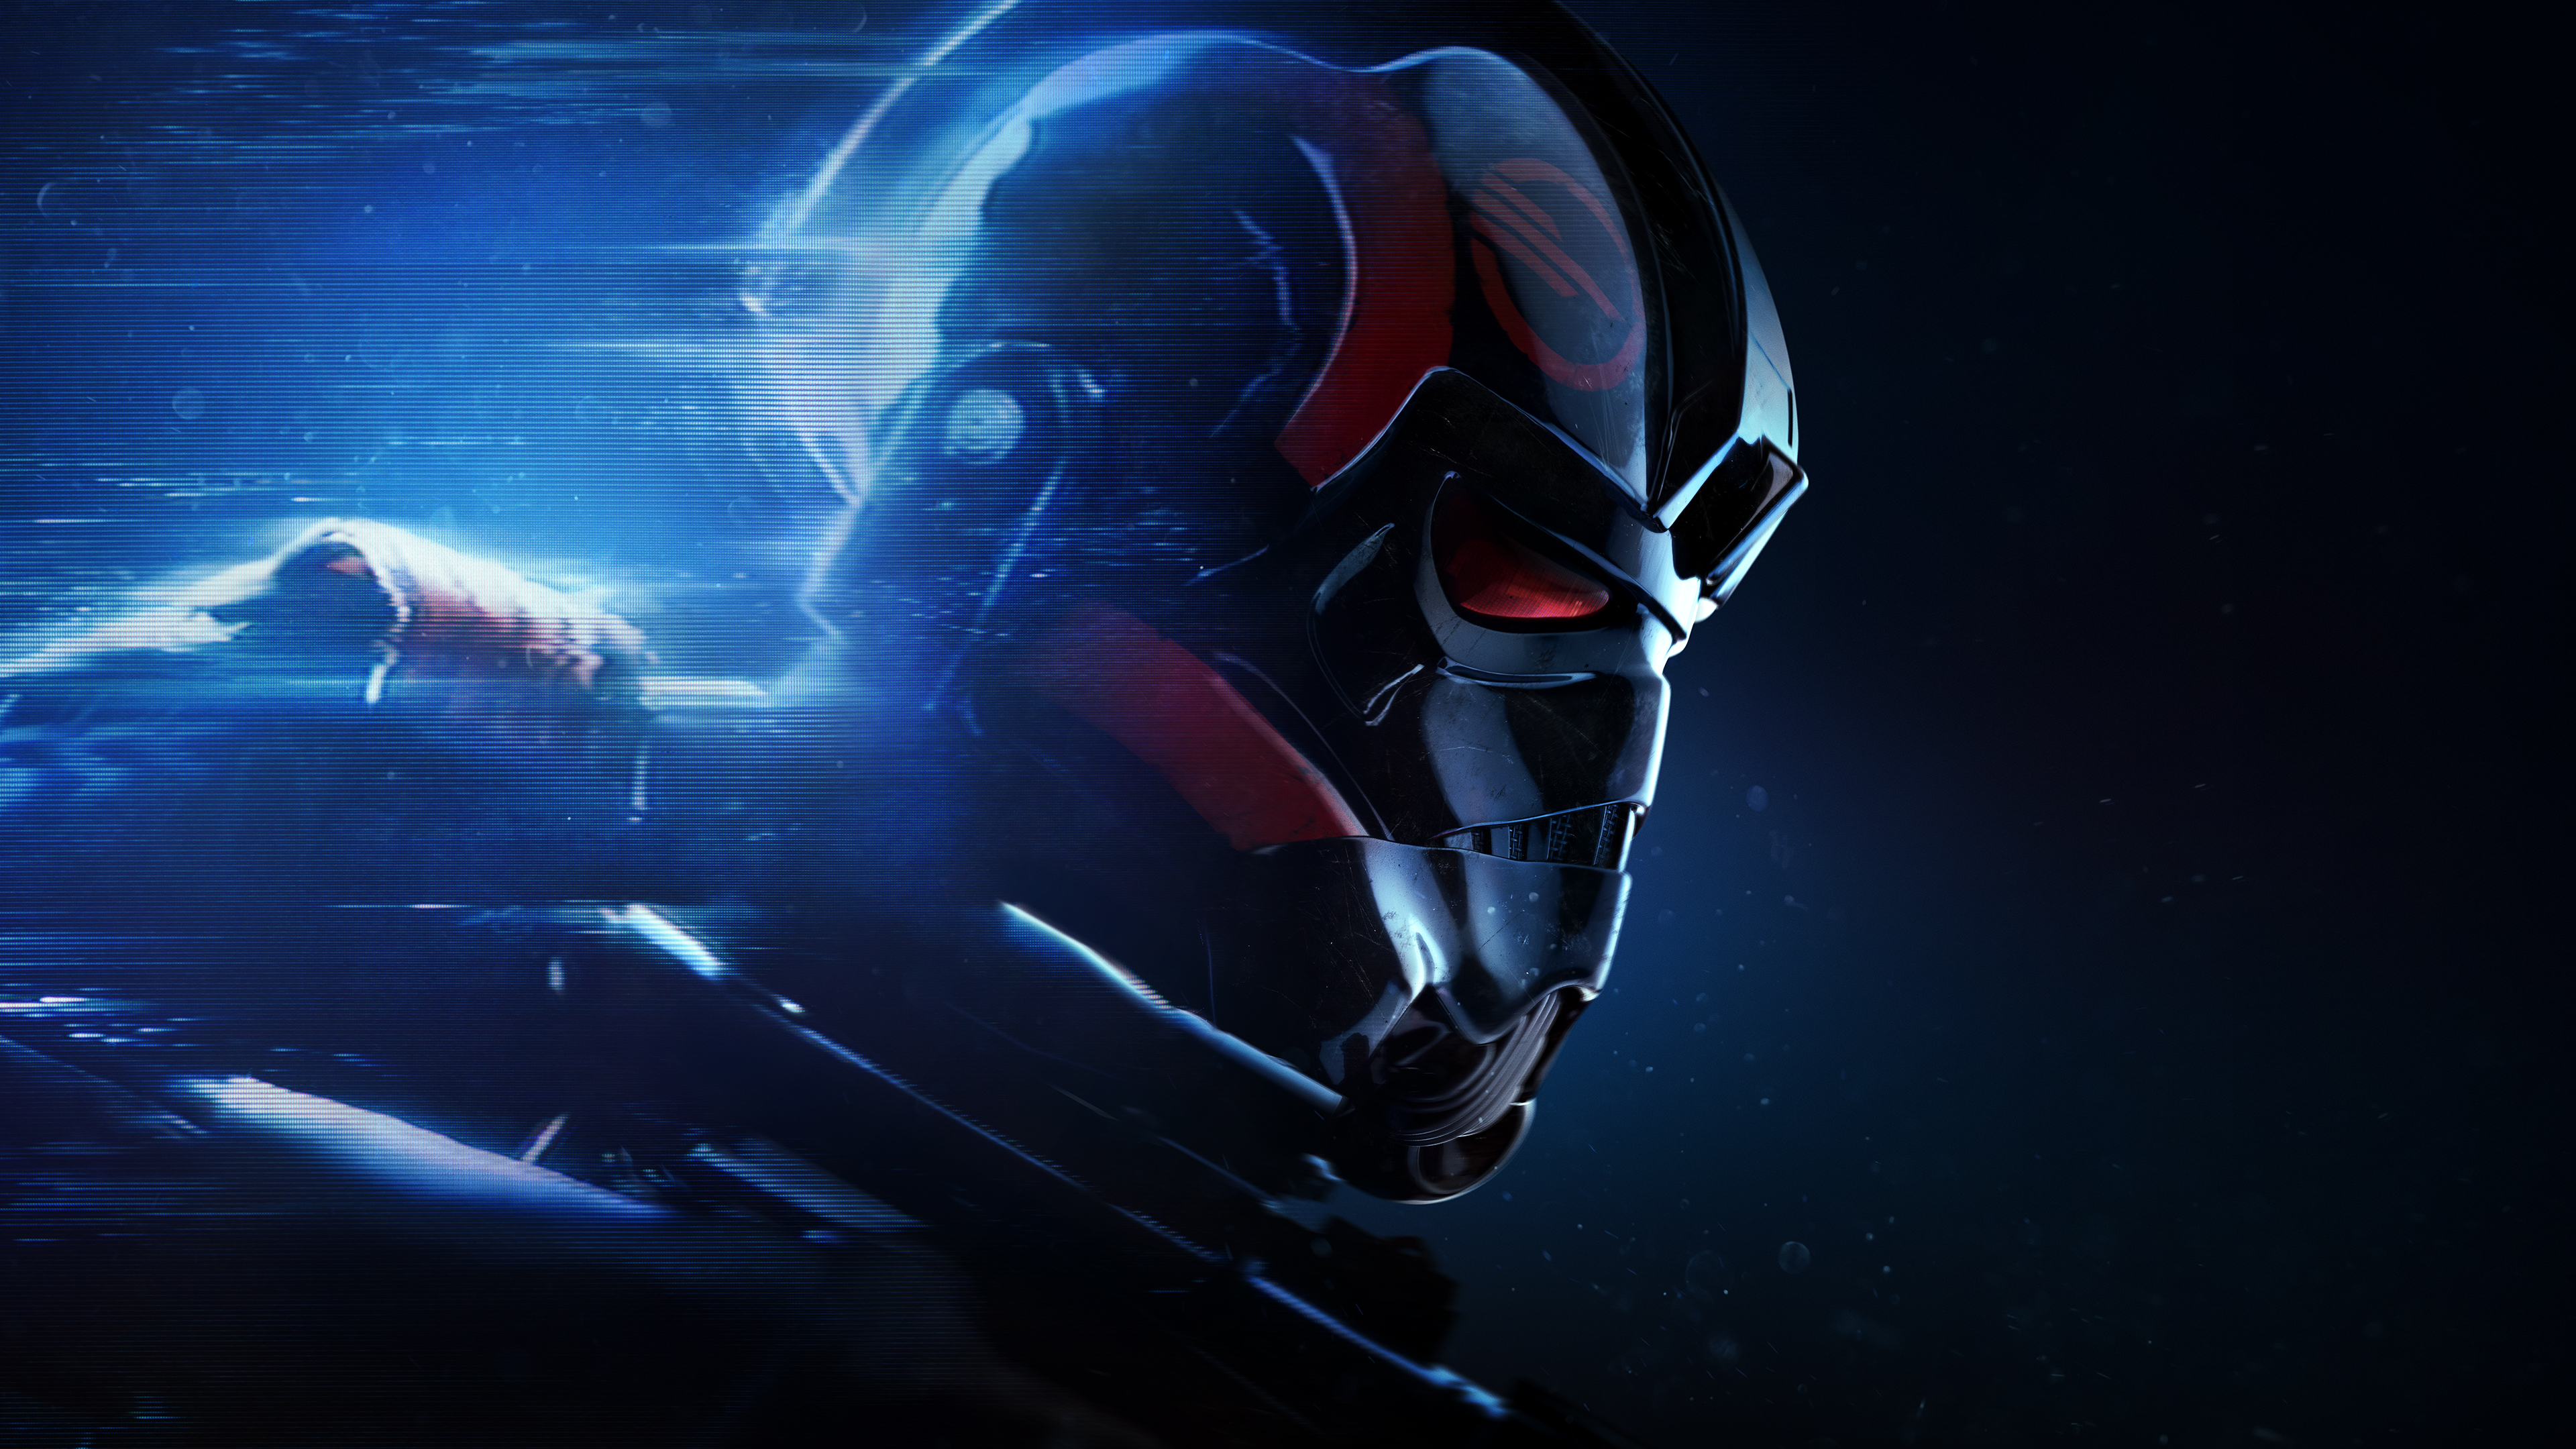 270 Star Wars Battlefront II 2017 HD Wallpapers and Backgrounds